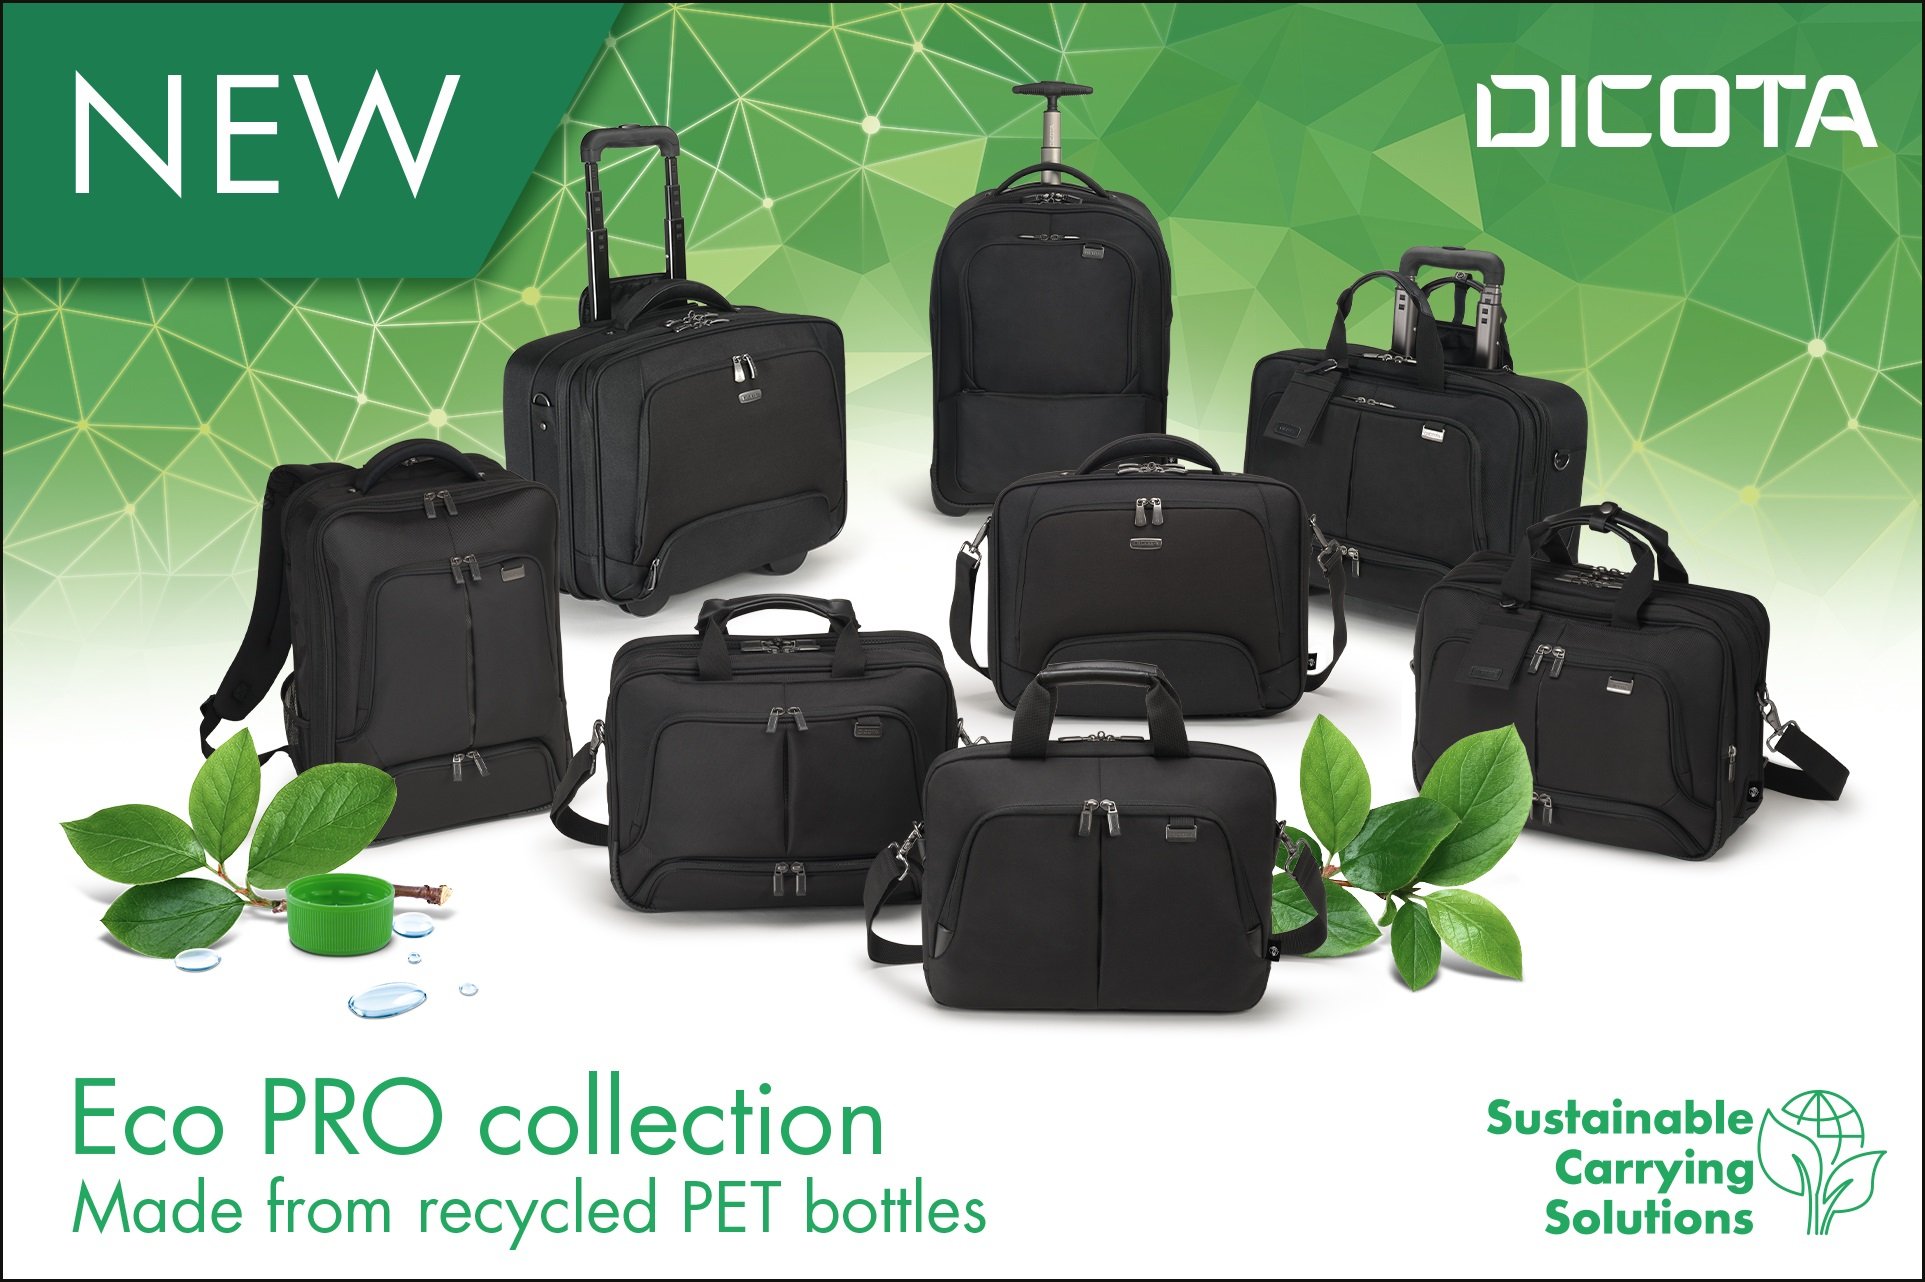 Now made from recycled PET bottles – the Eco PRO collection